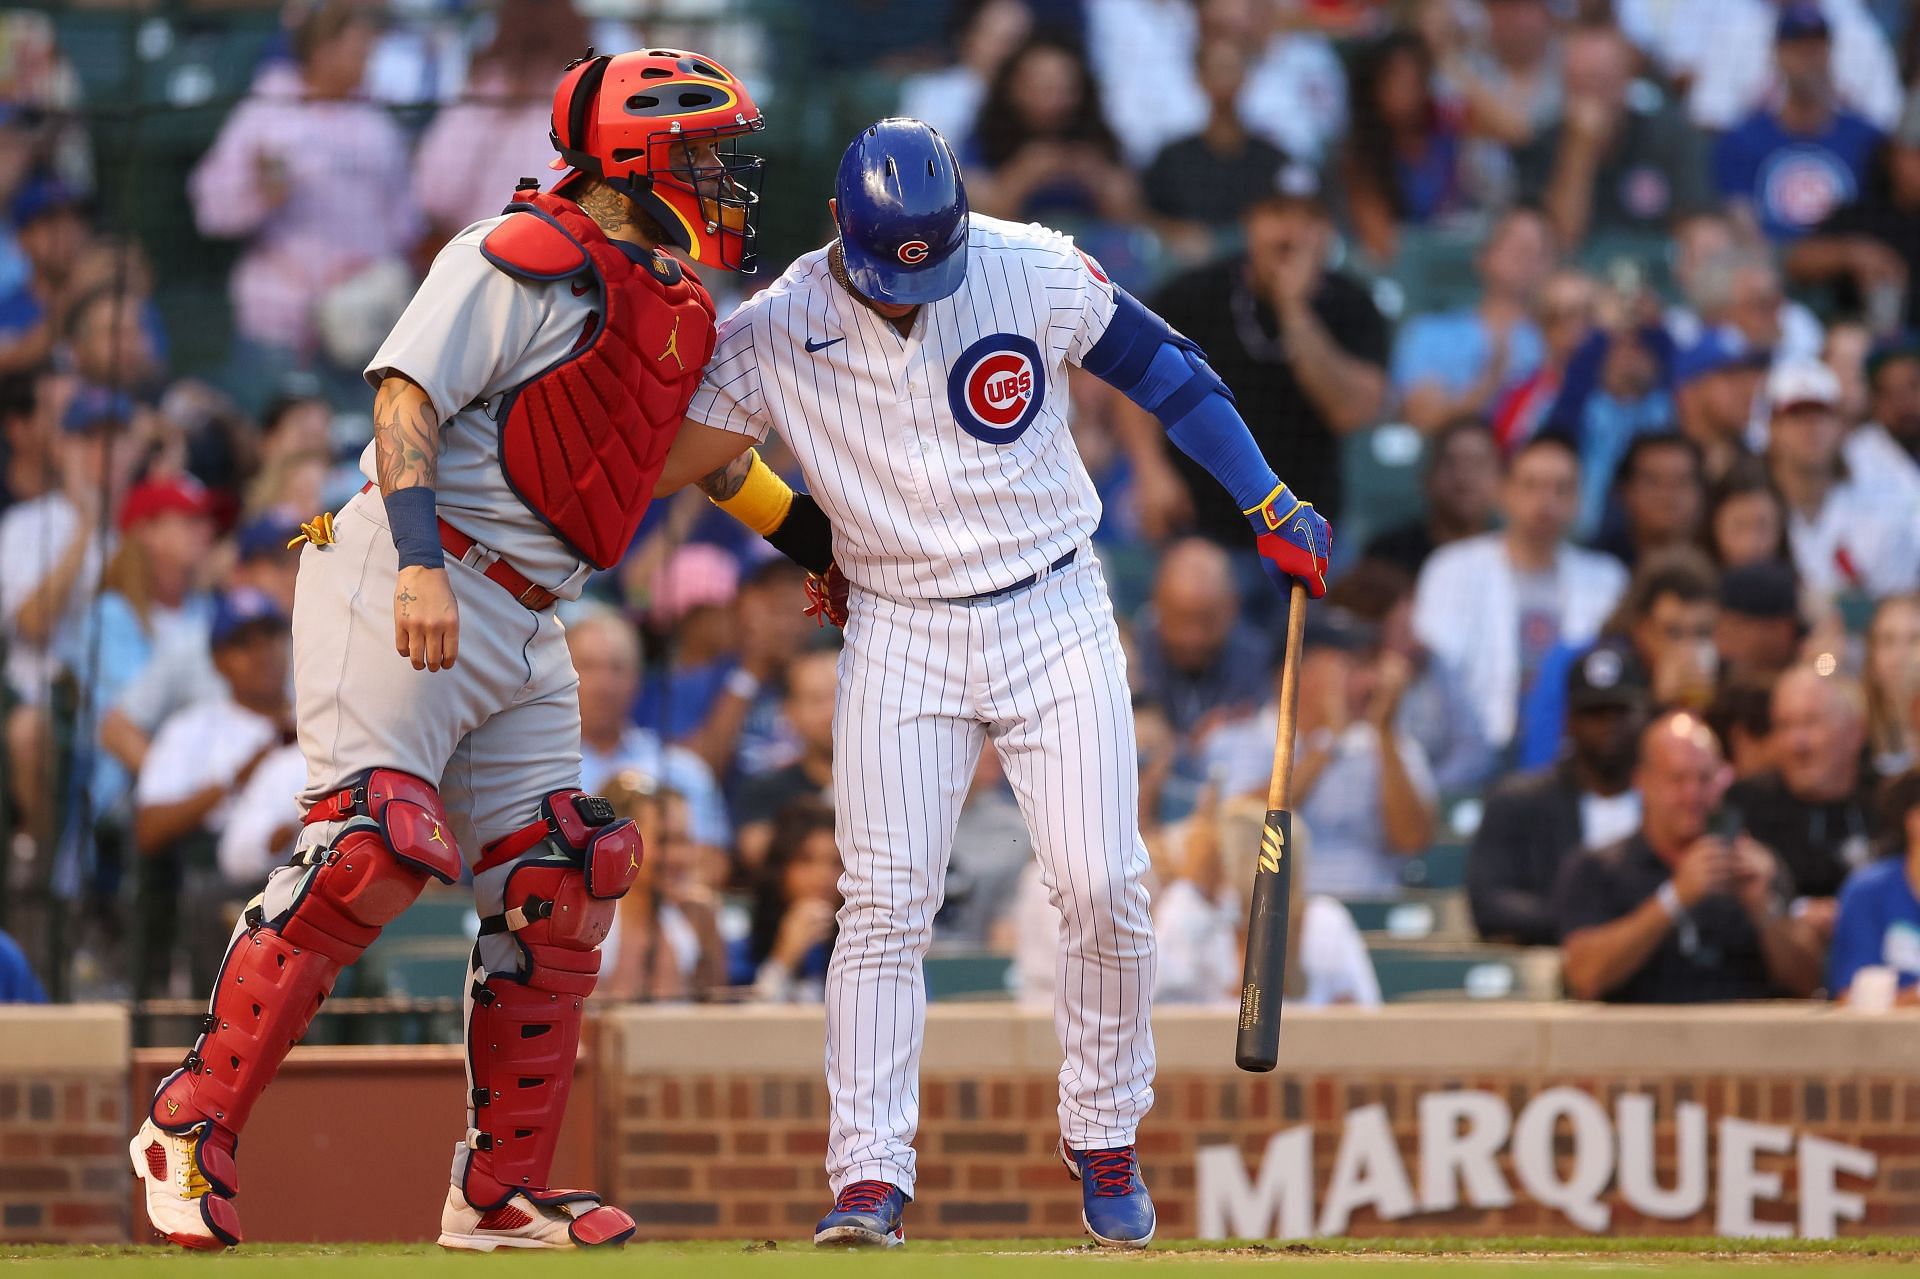 St. Louis Cardinals fans tear into Willson Contreras, label him poster boy  for team's struggles: It's all that scumbag Willson Contreras' fault